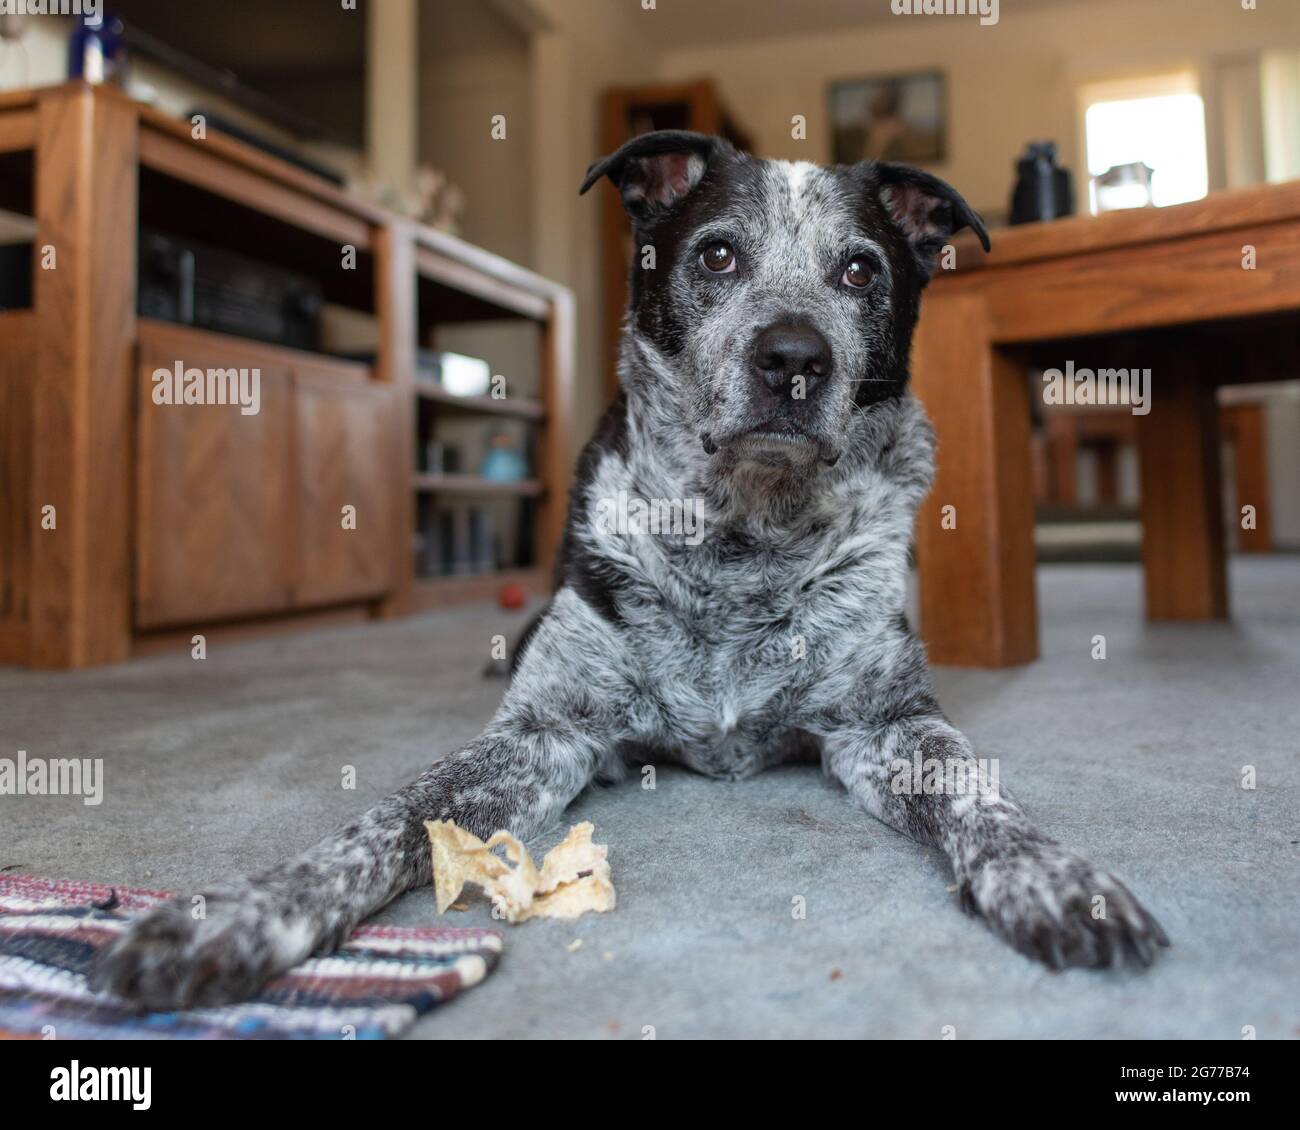 Mixed breed Pit Bull family pet dog lying on the carpet floor at home with alert eyes and ears looking out. Stock Photo